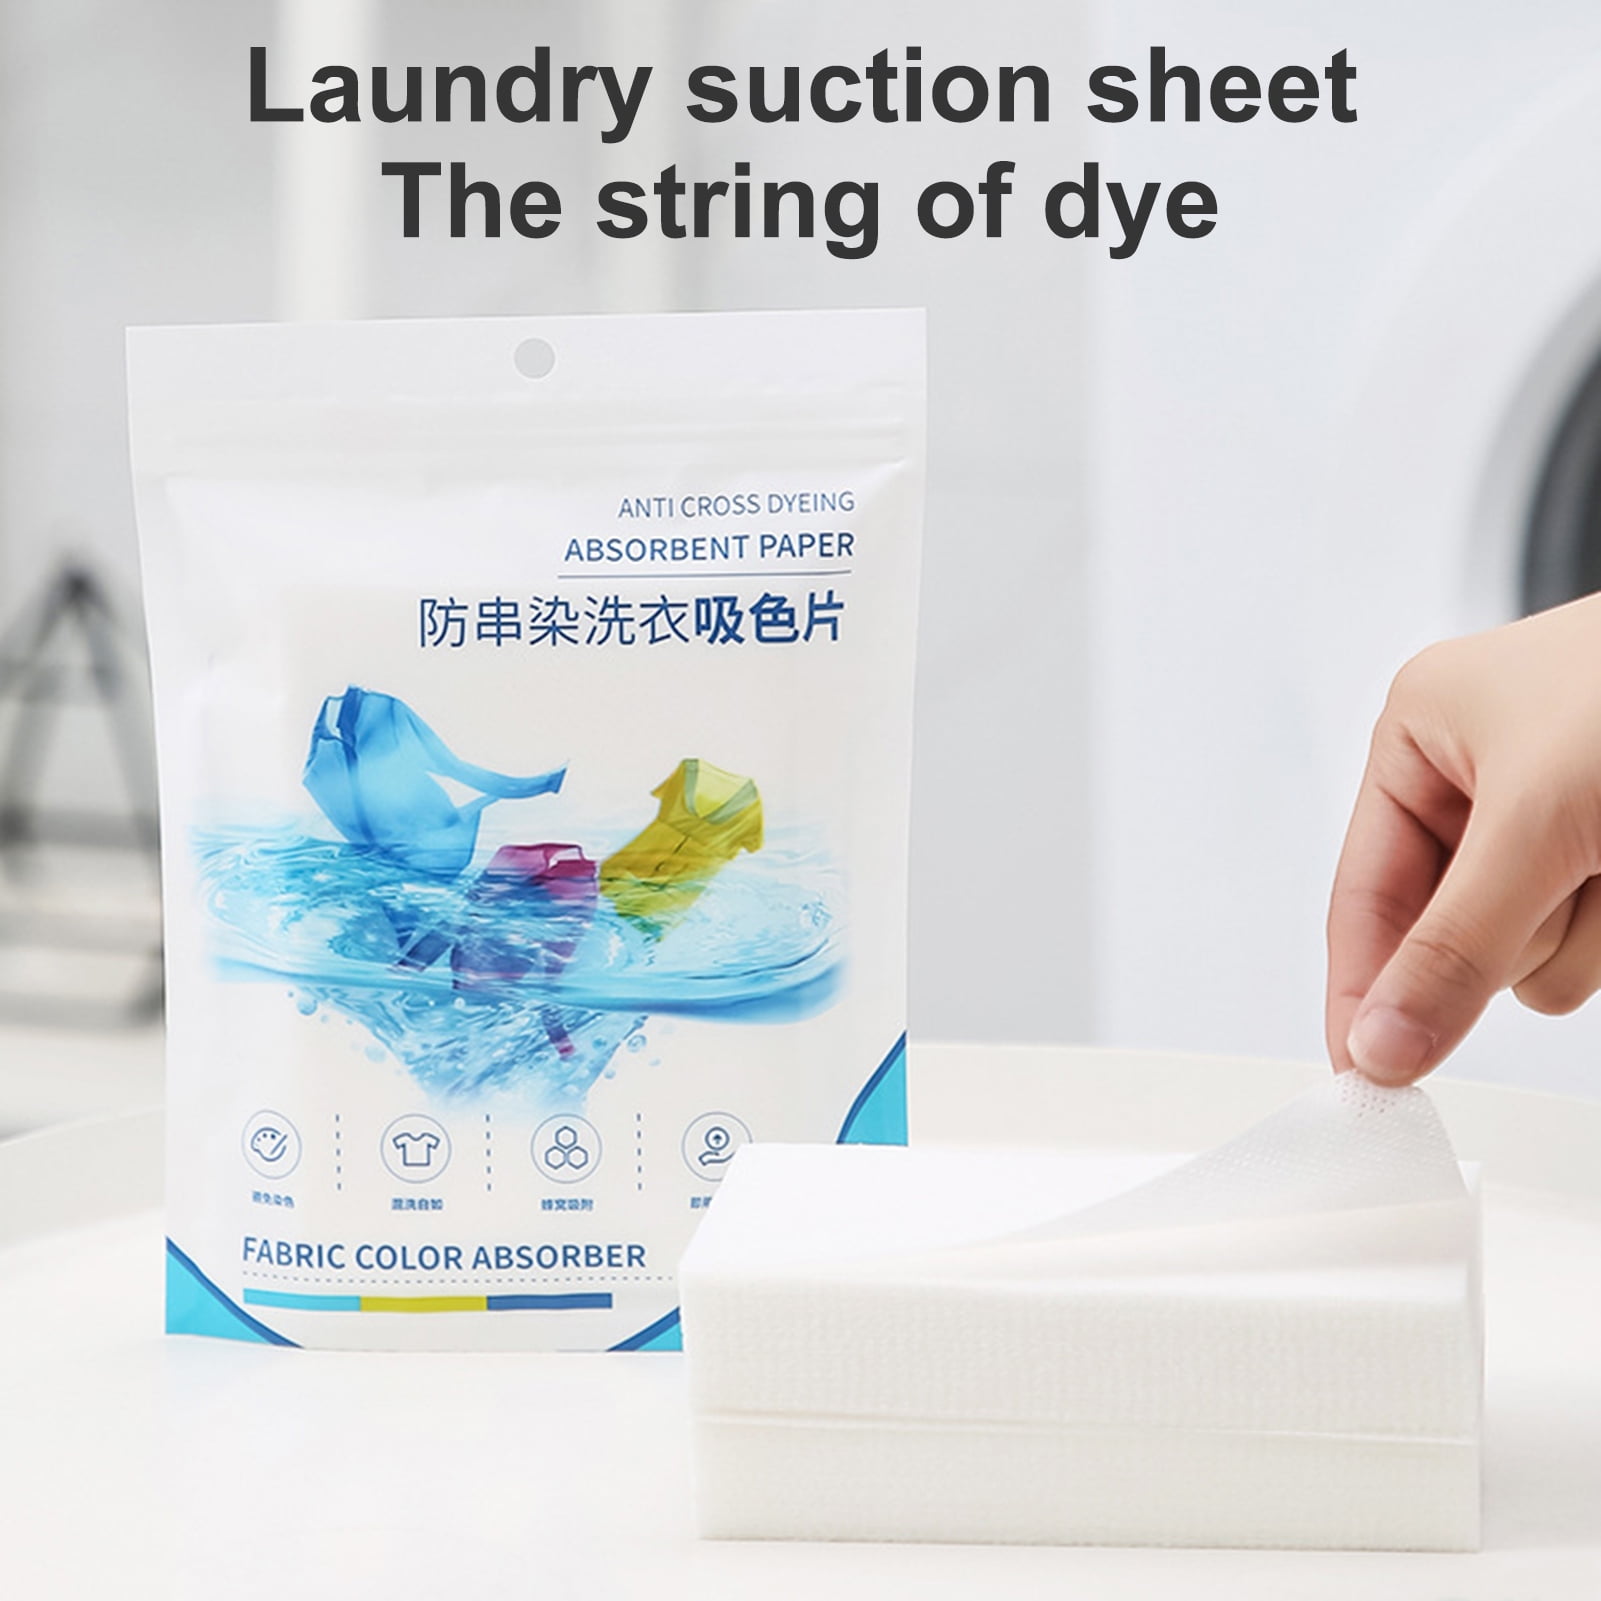 Reco Laundry Detergent Sheets - 92 Wash Pack